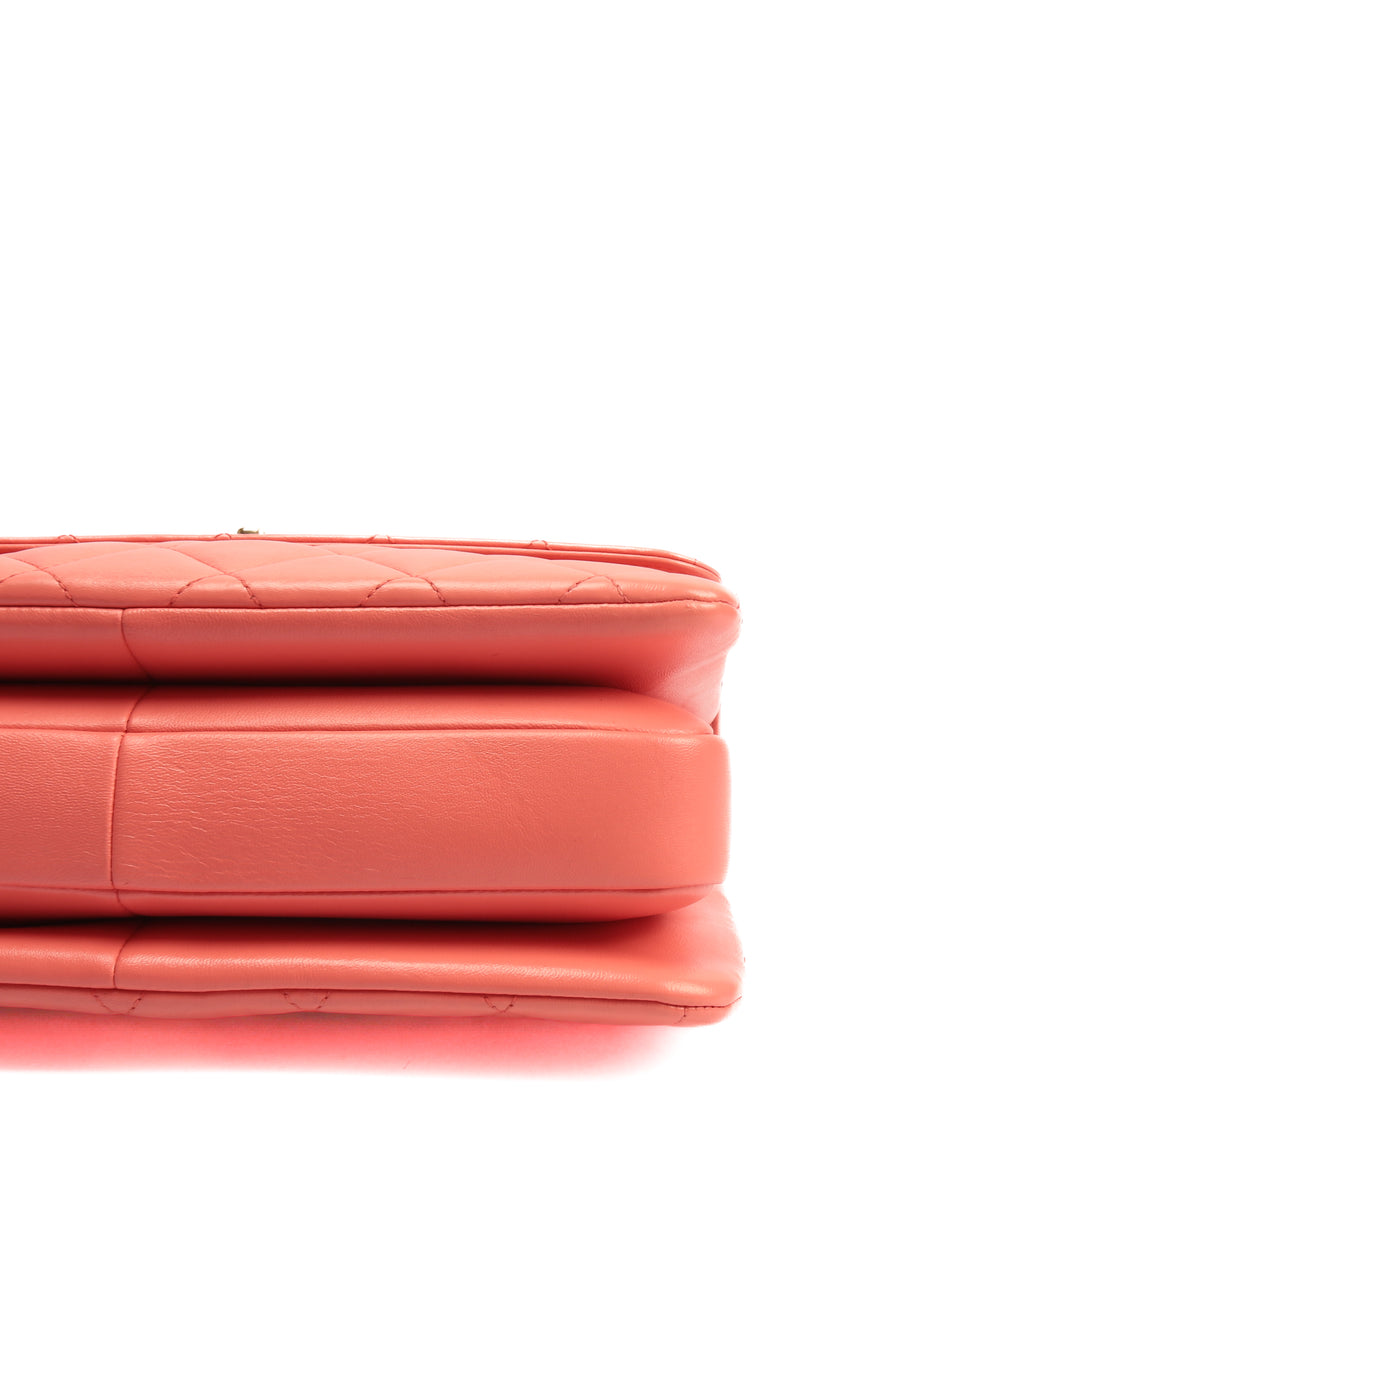 Chanel Coral Lizard Wallet on Chain